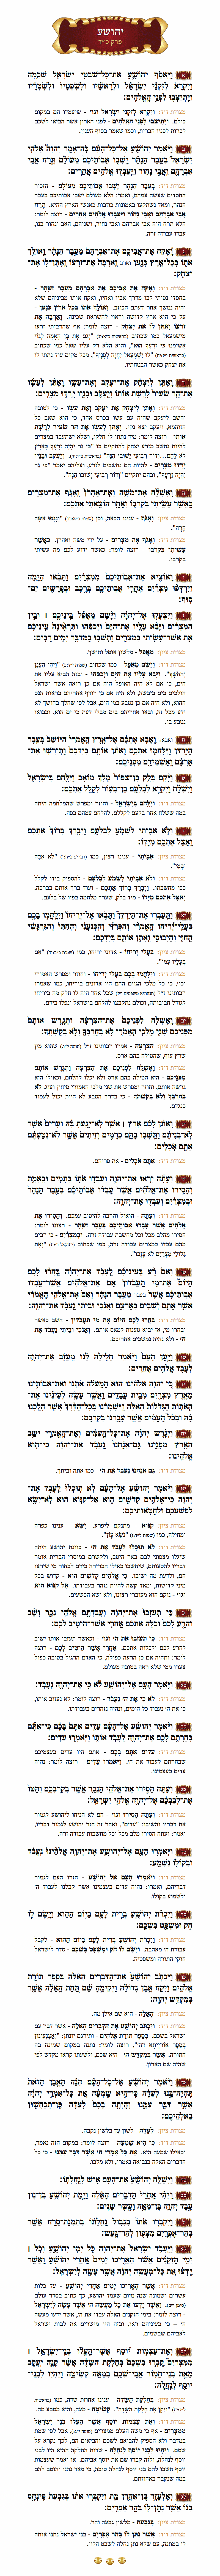 Sefer Yehoshua Chapter 24 with commentary